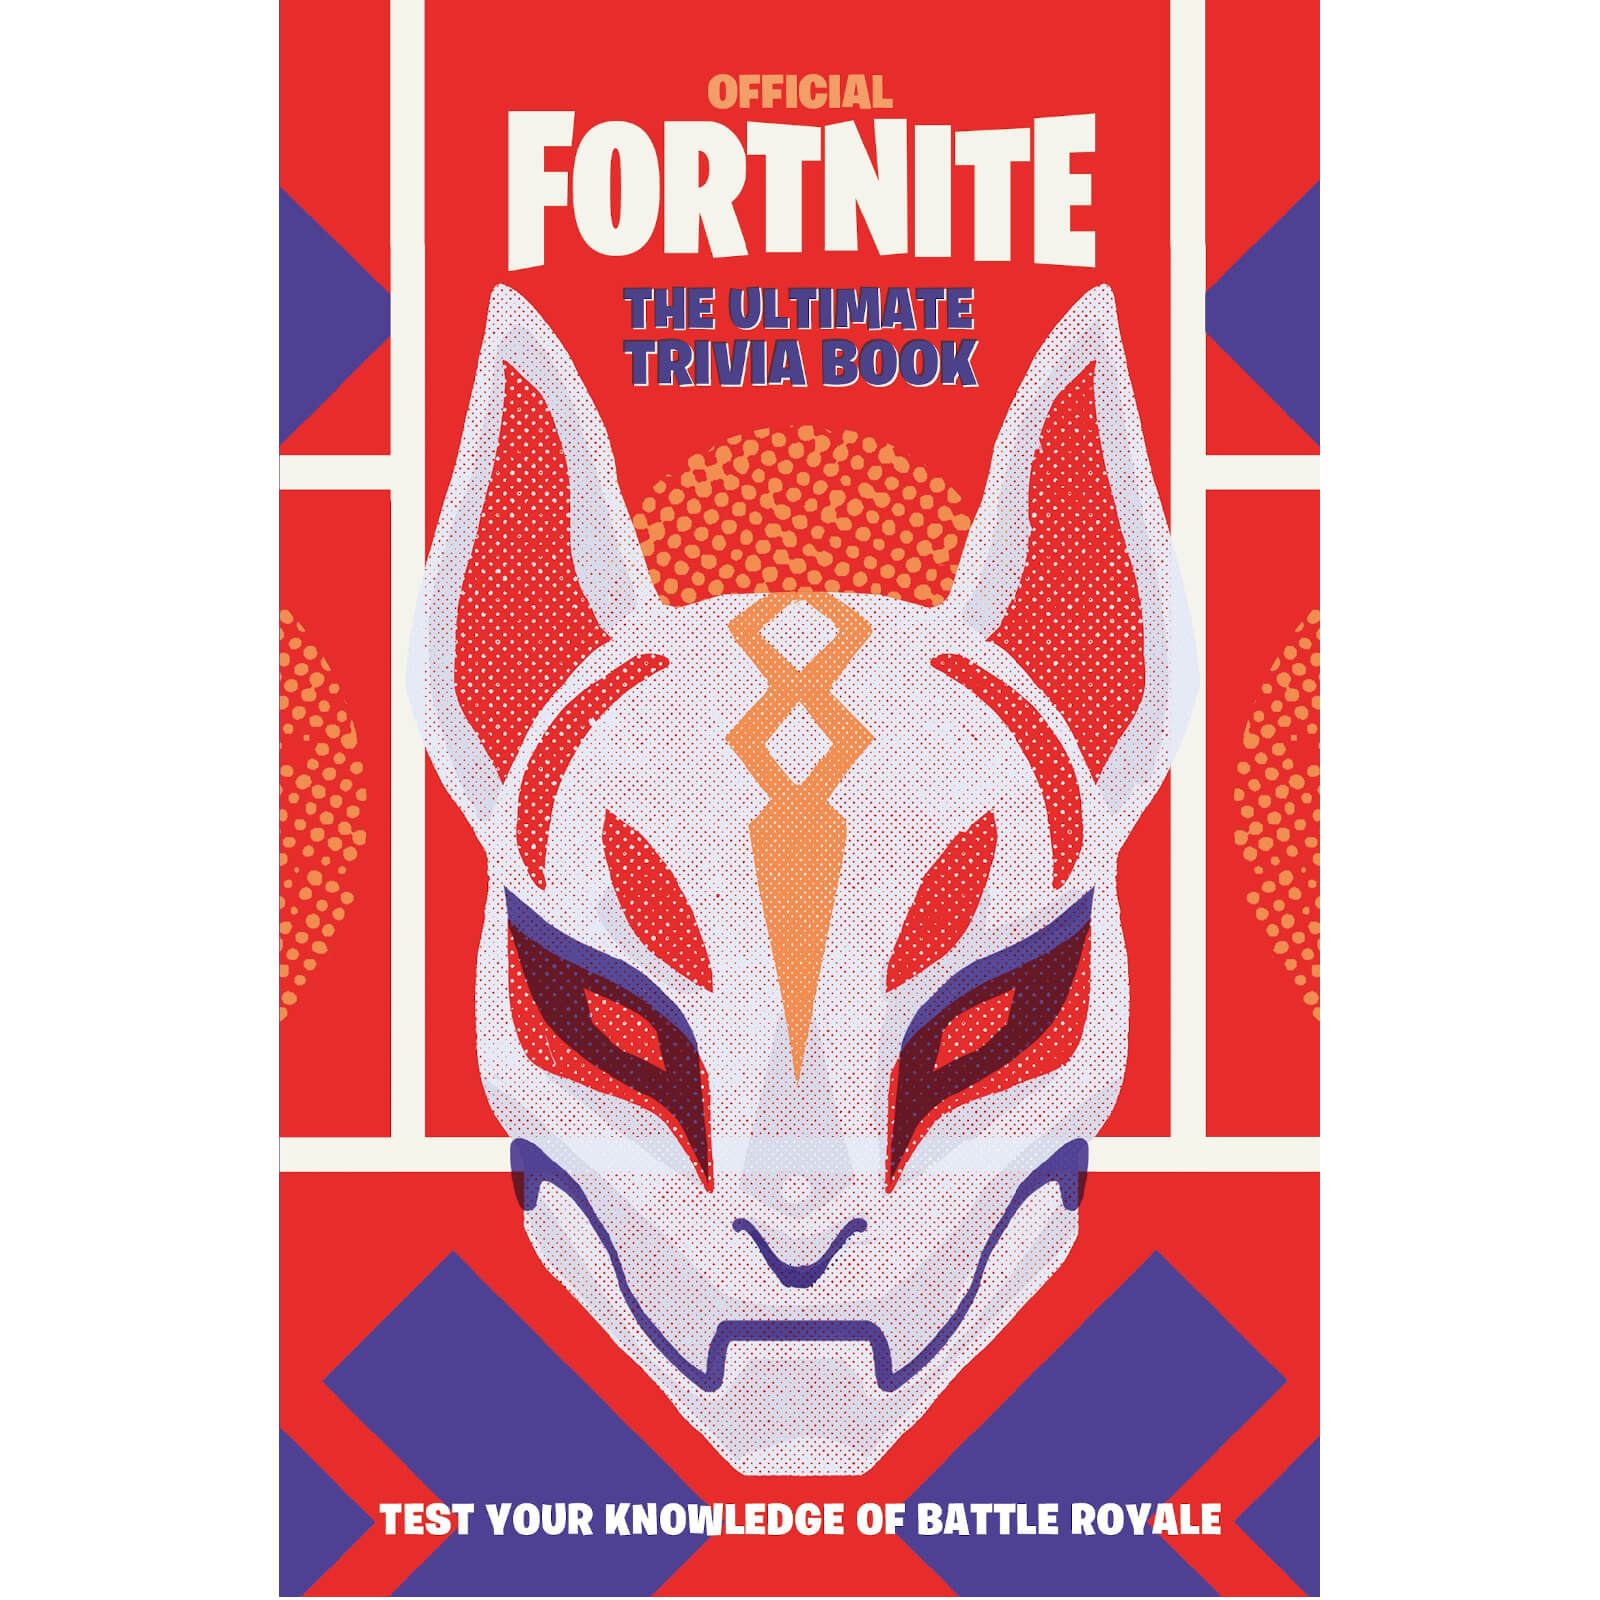 Fortnite Official: The Ultimate Trivia Book